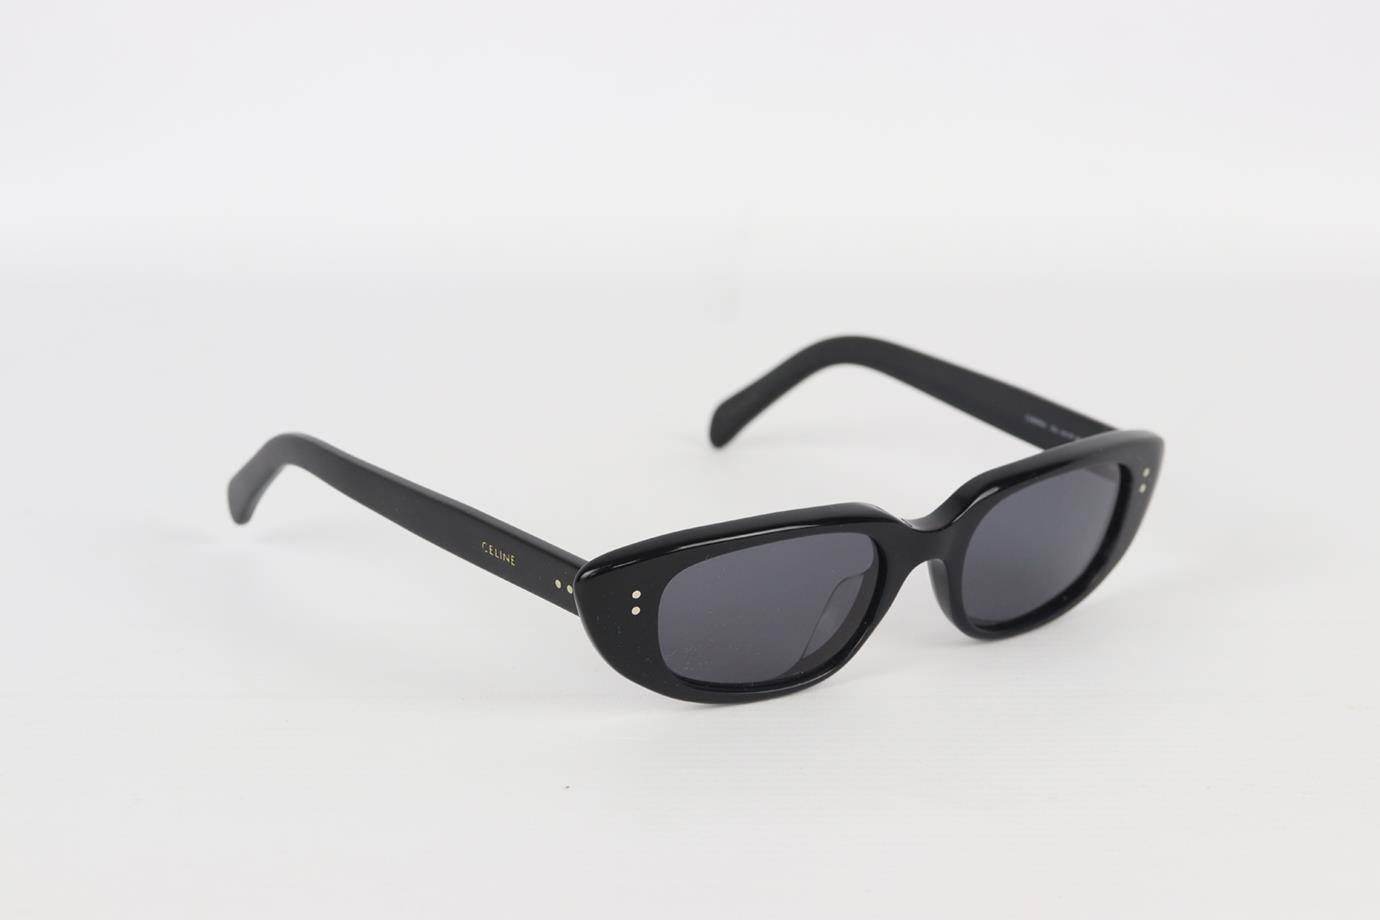 Celine cat eye acetate sunglasses. Black. Does not come with dustbag or case. Style Code: CL40095U. Lens Size: 51 mm. Arm Size: 19 mm. Bridge Size: 145 mm. Very good condition - Light signs of wear; see pictures.
